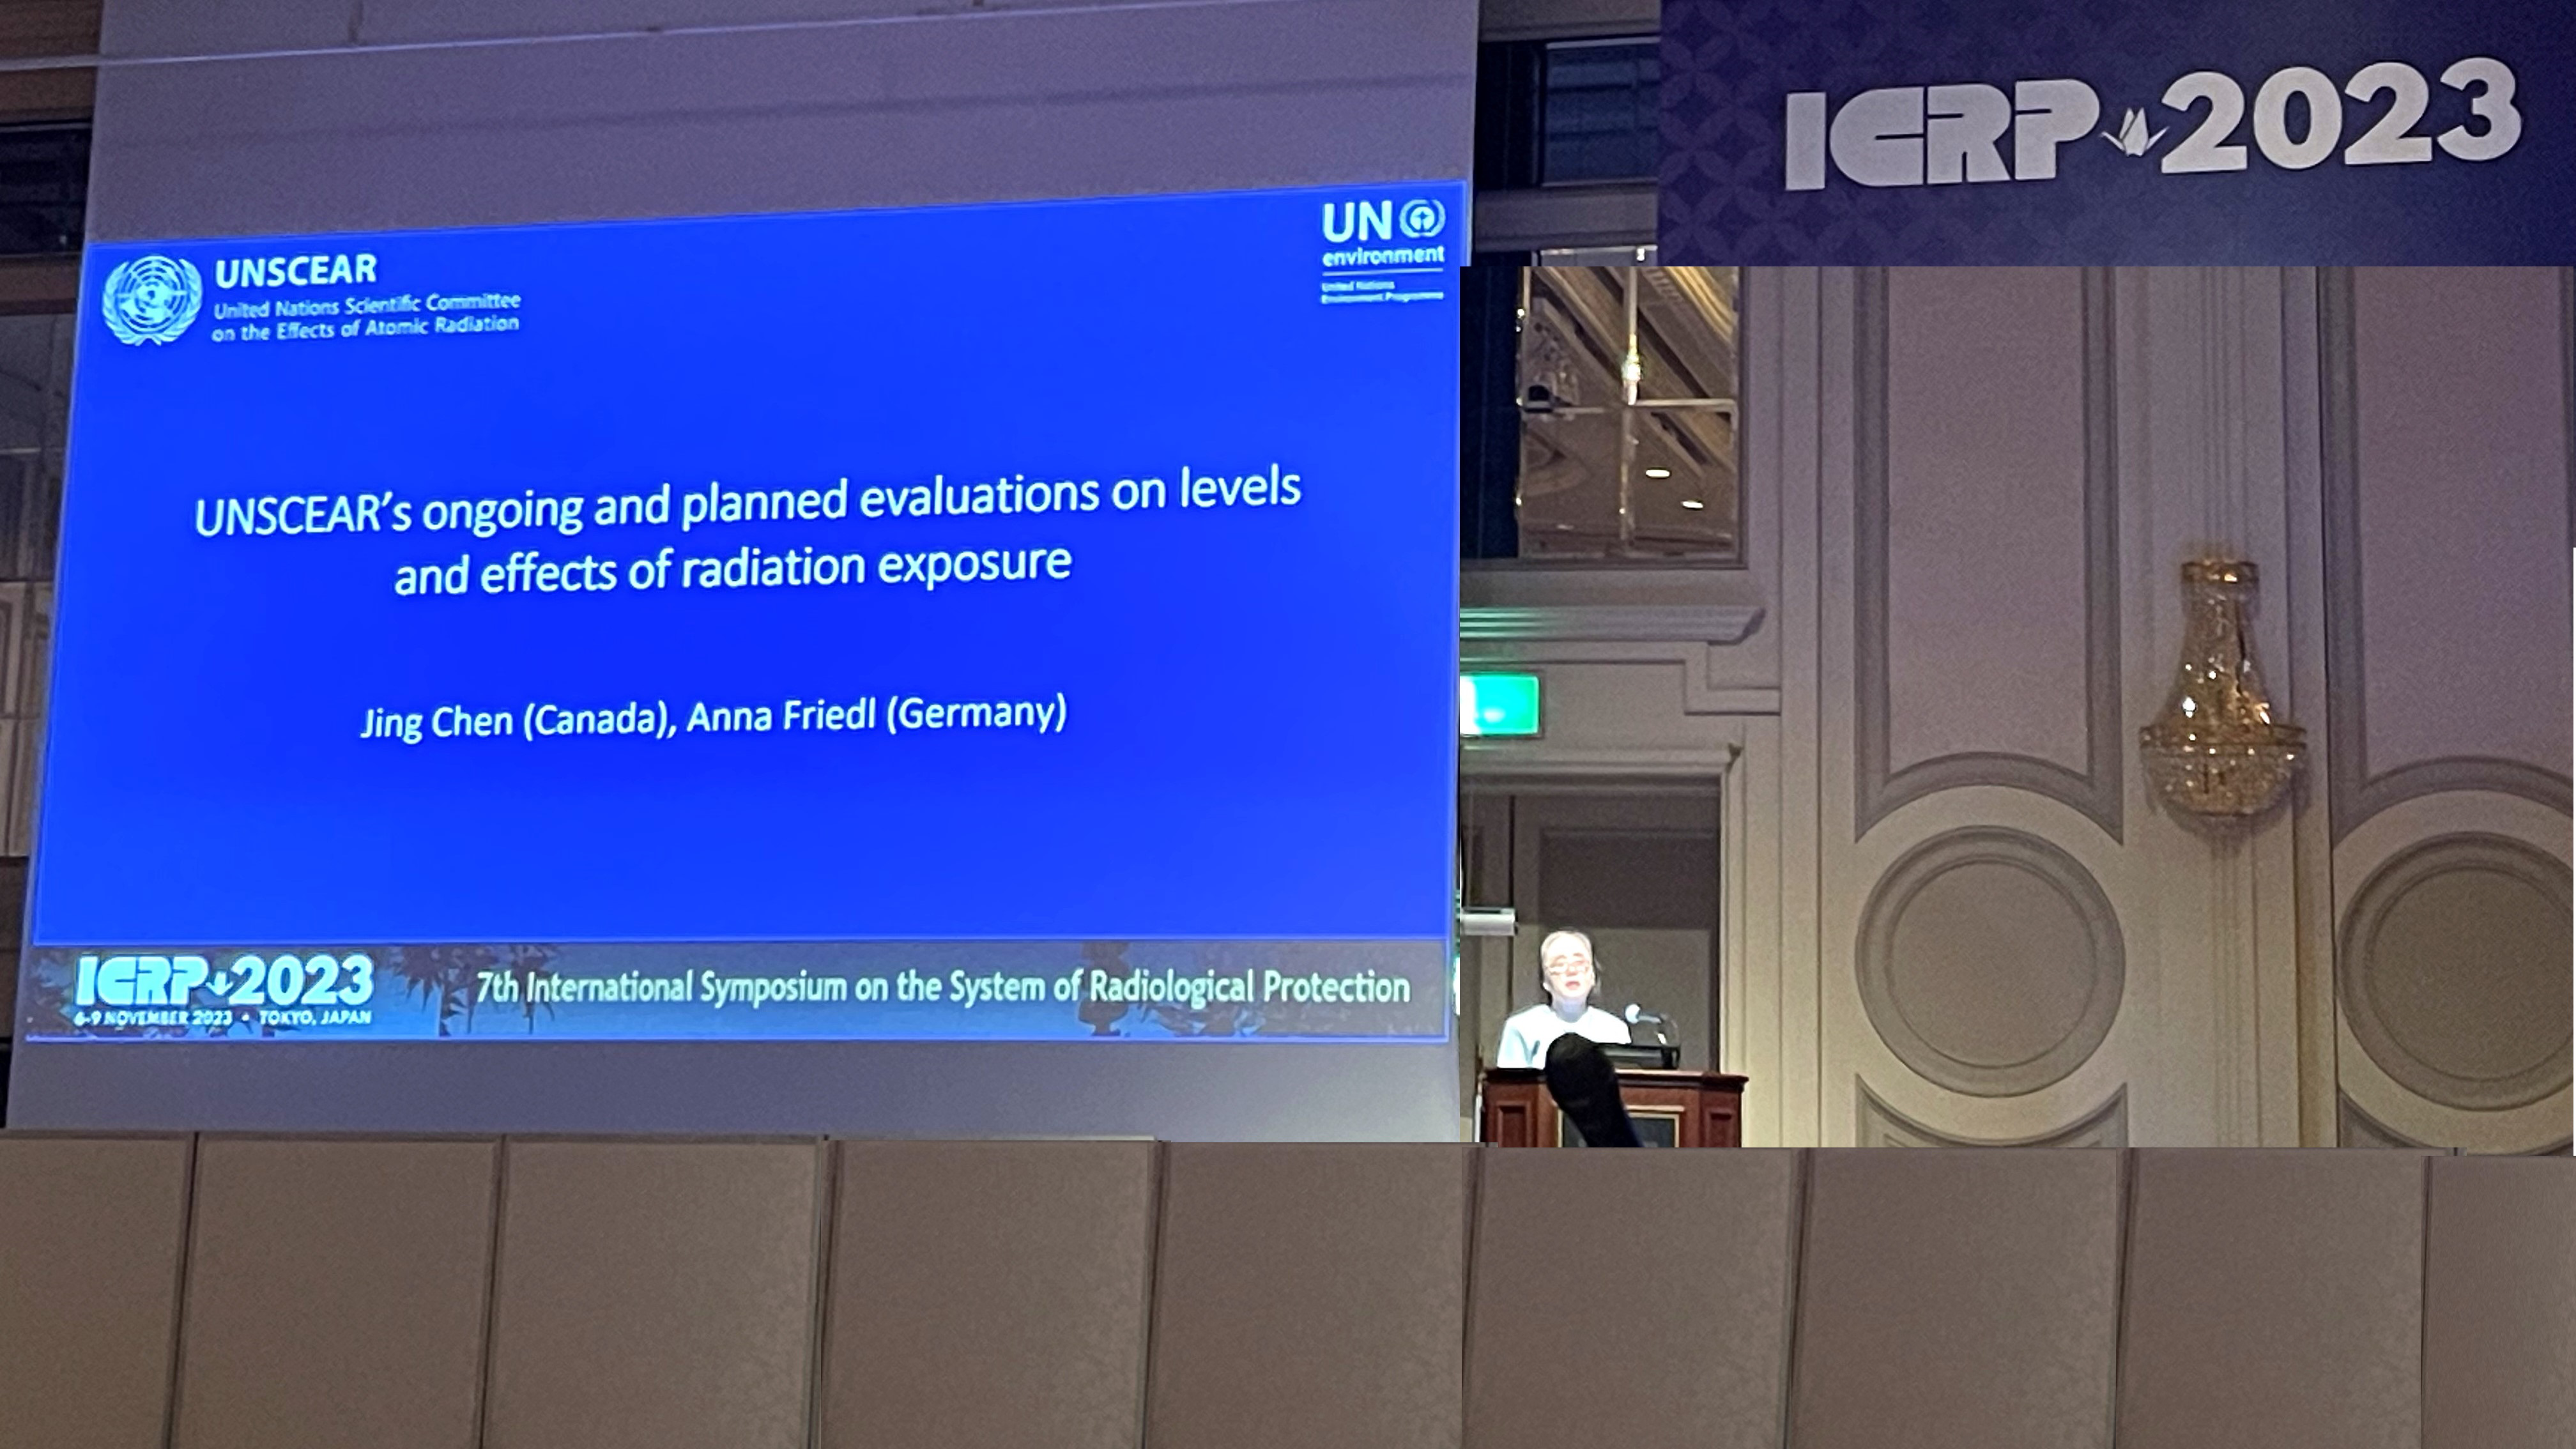 Chair presents UNSCEAR's work at the ICRP 2023 symposium